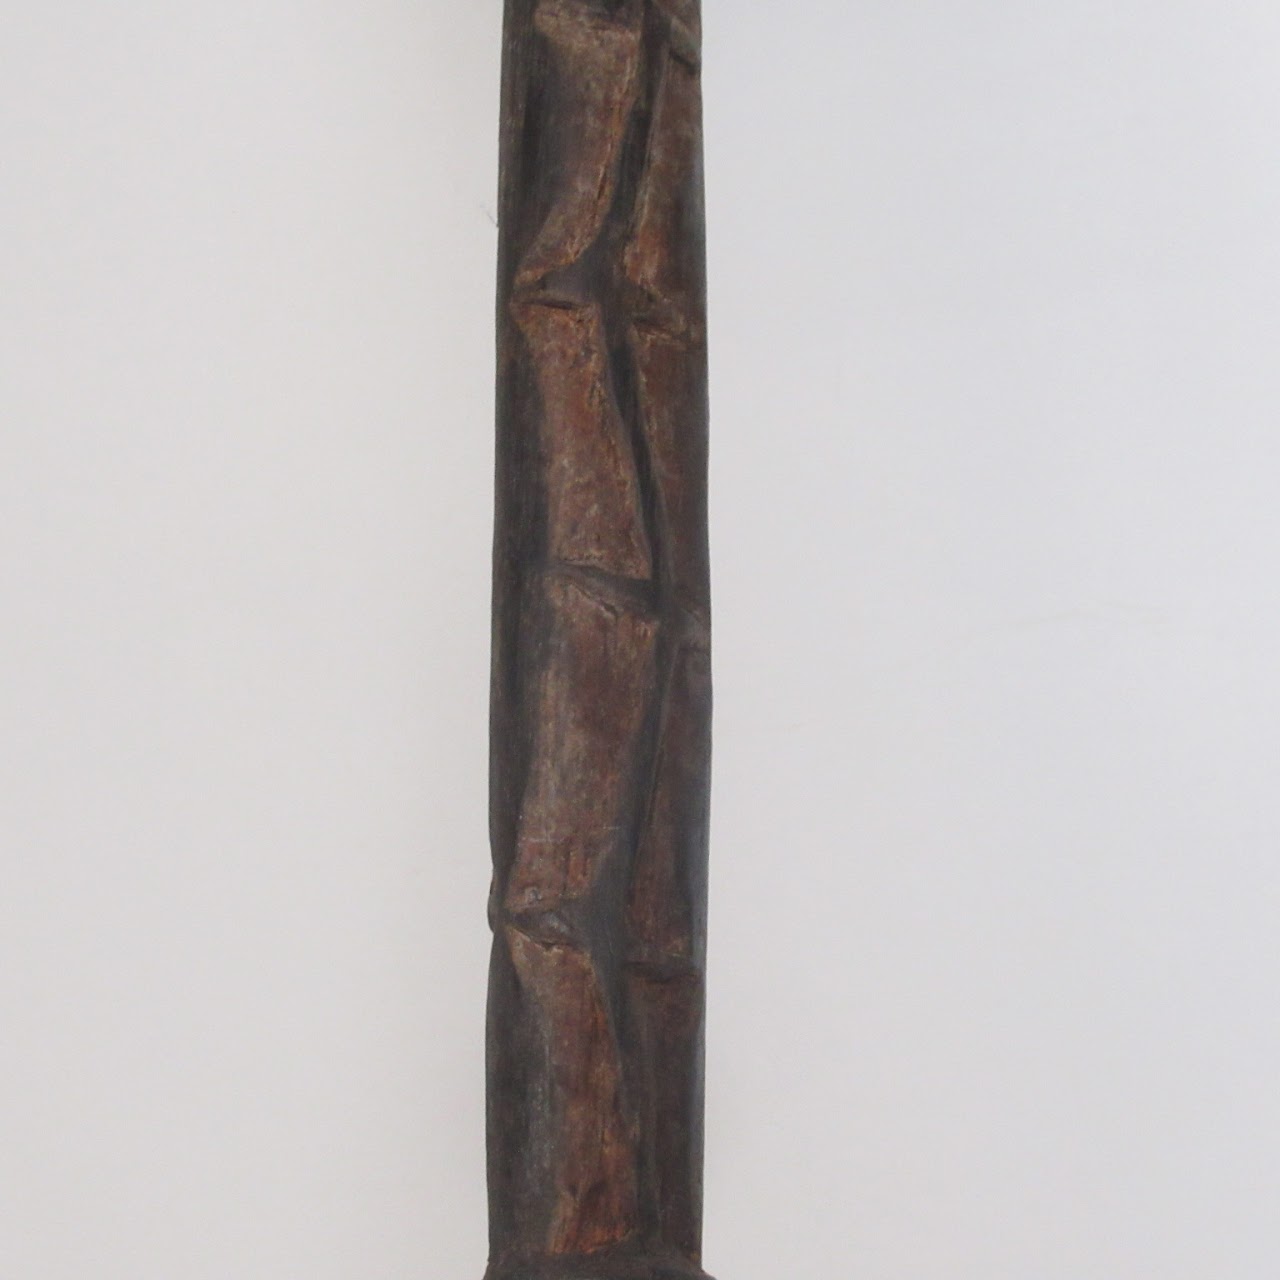 Carved Ceremonial Wood Staff